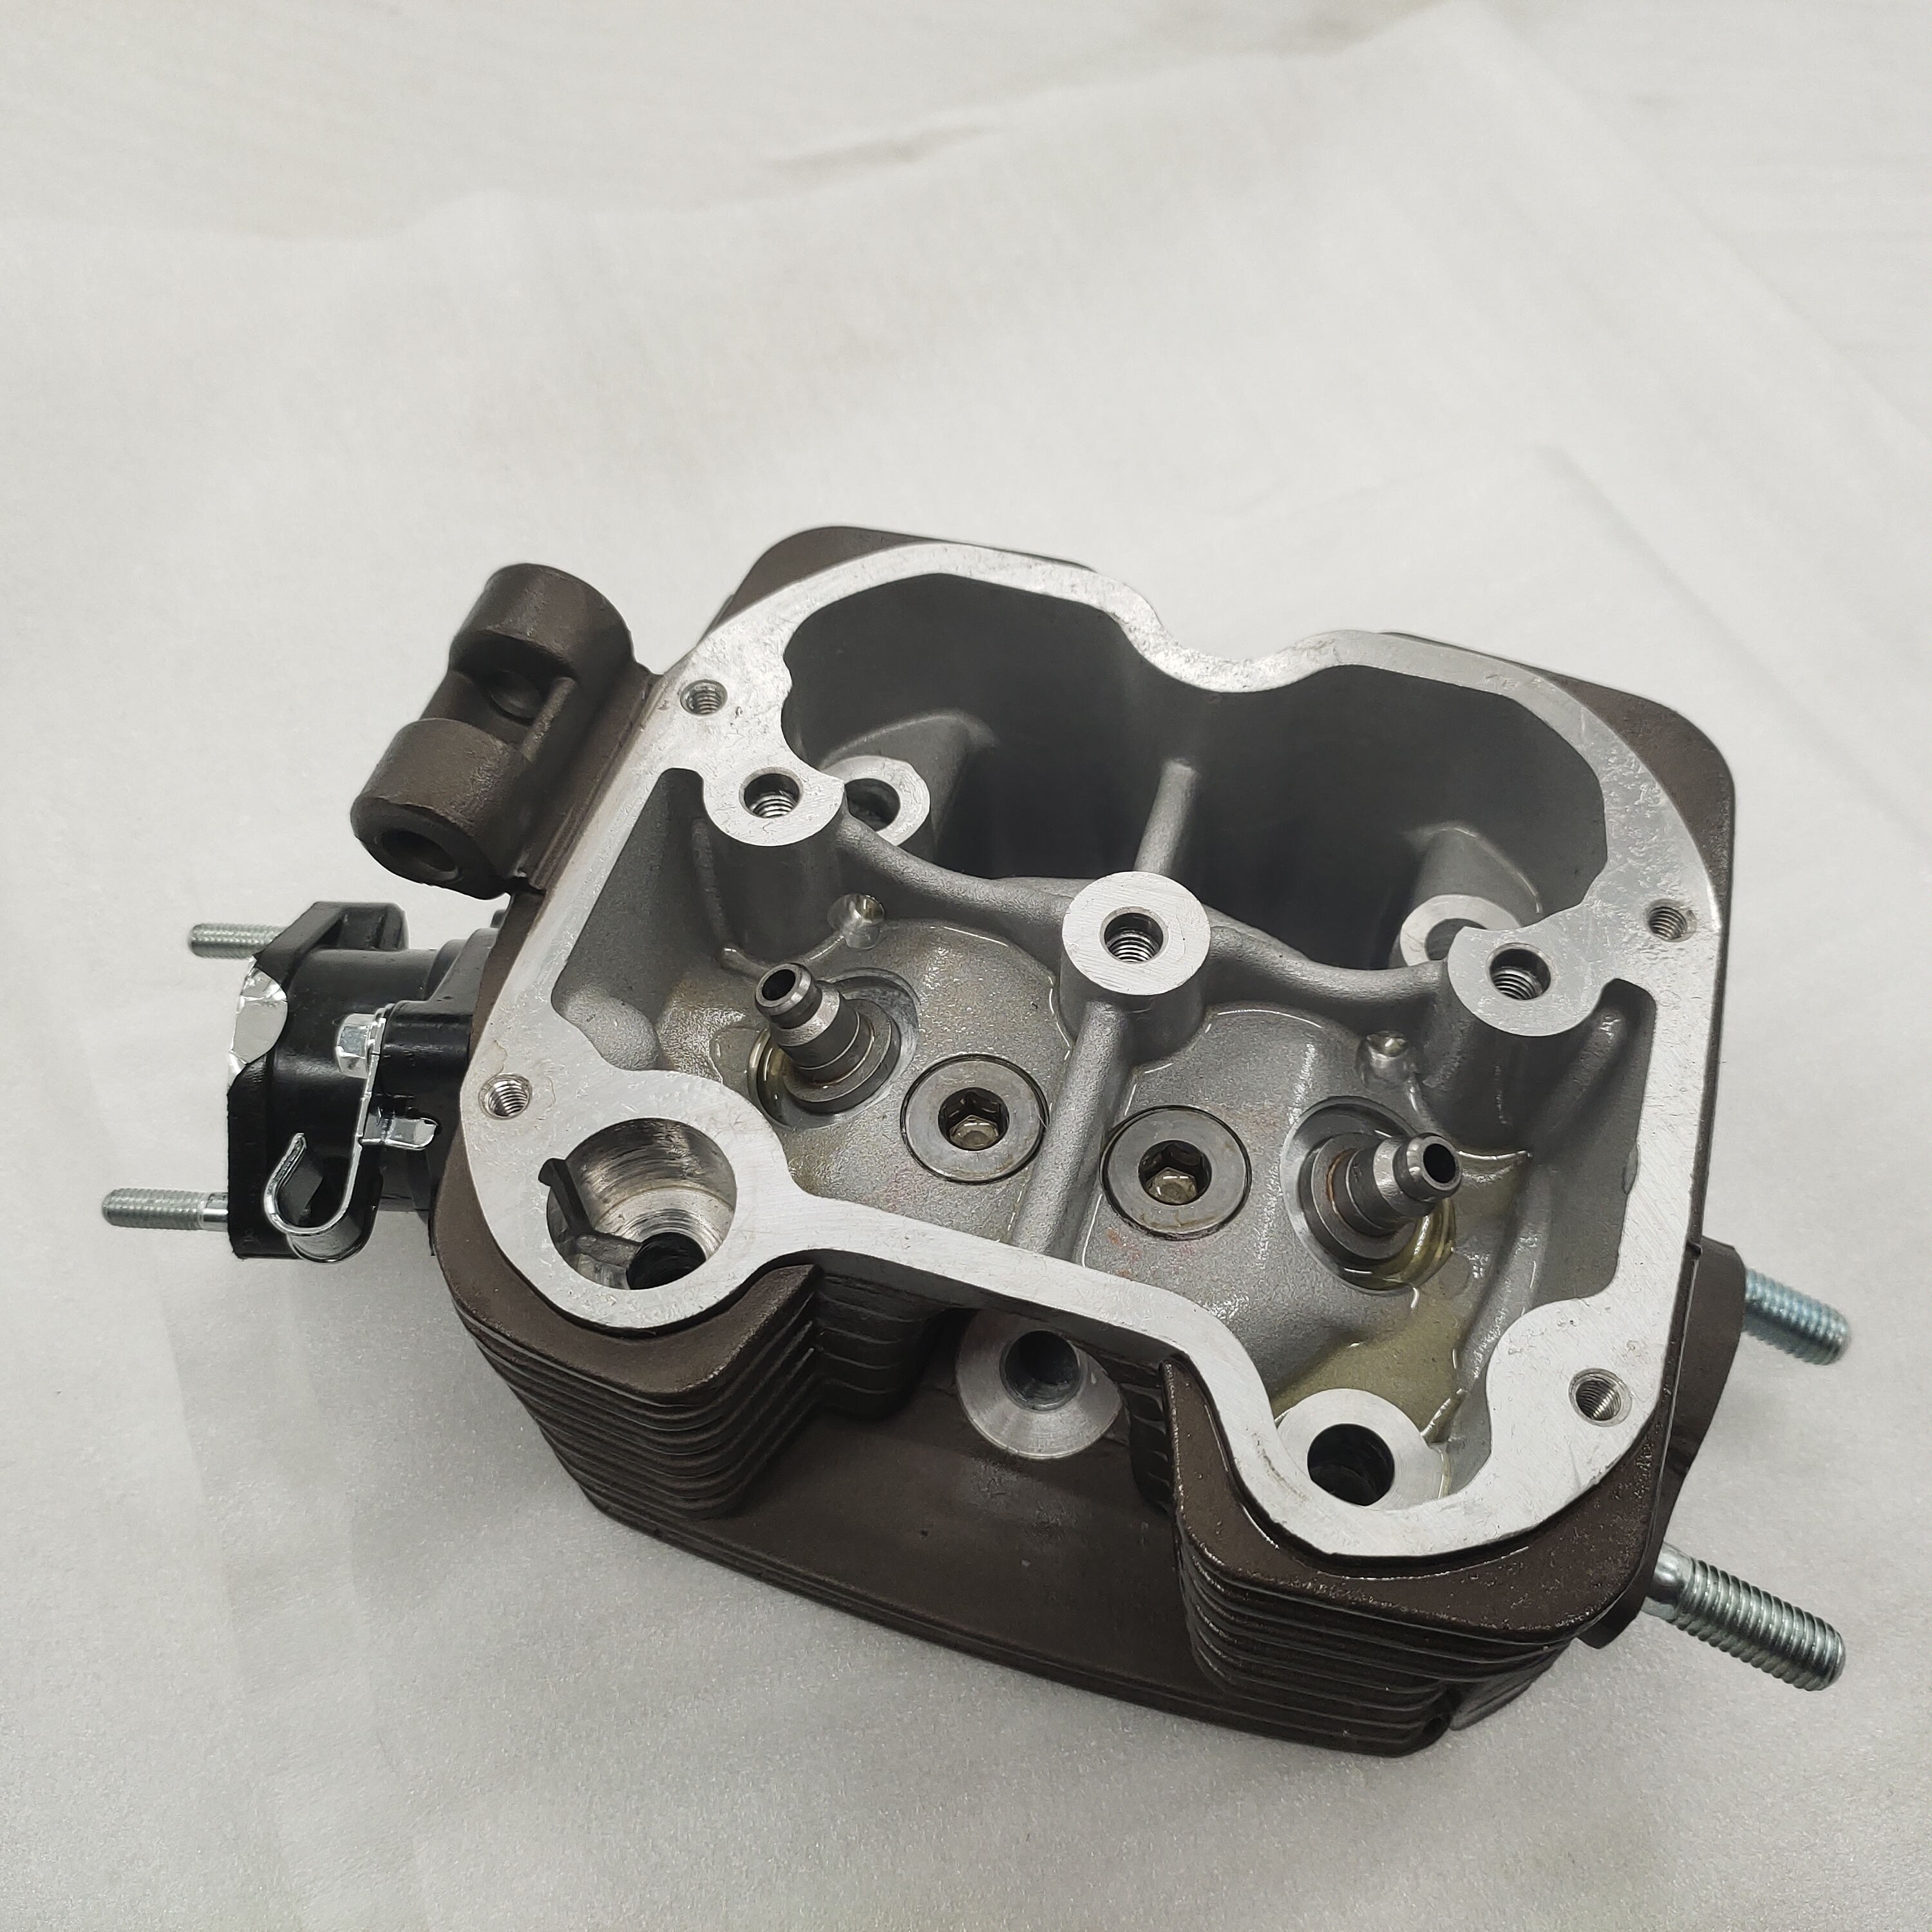 China factory new original motorcycle LIFAN parts tricycle 250cc water-cooled engine cylinder head high warranty product